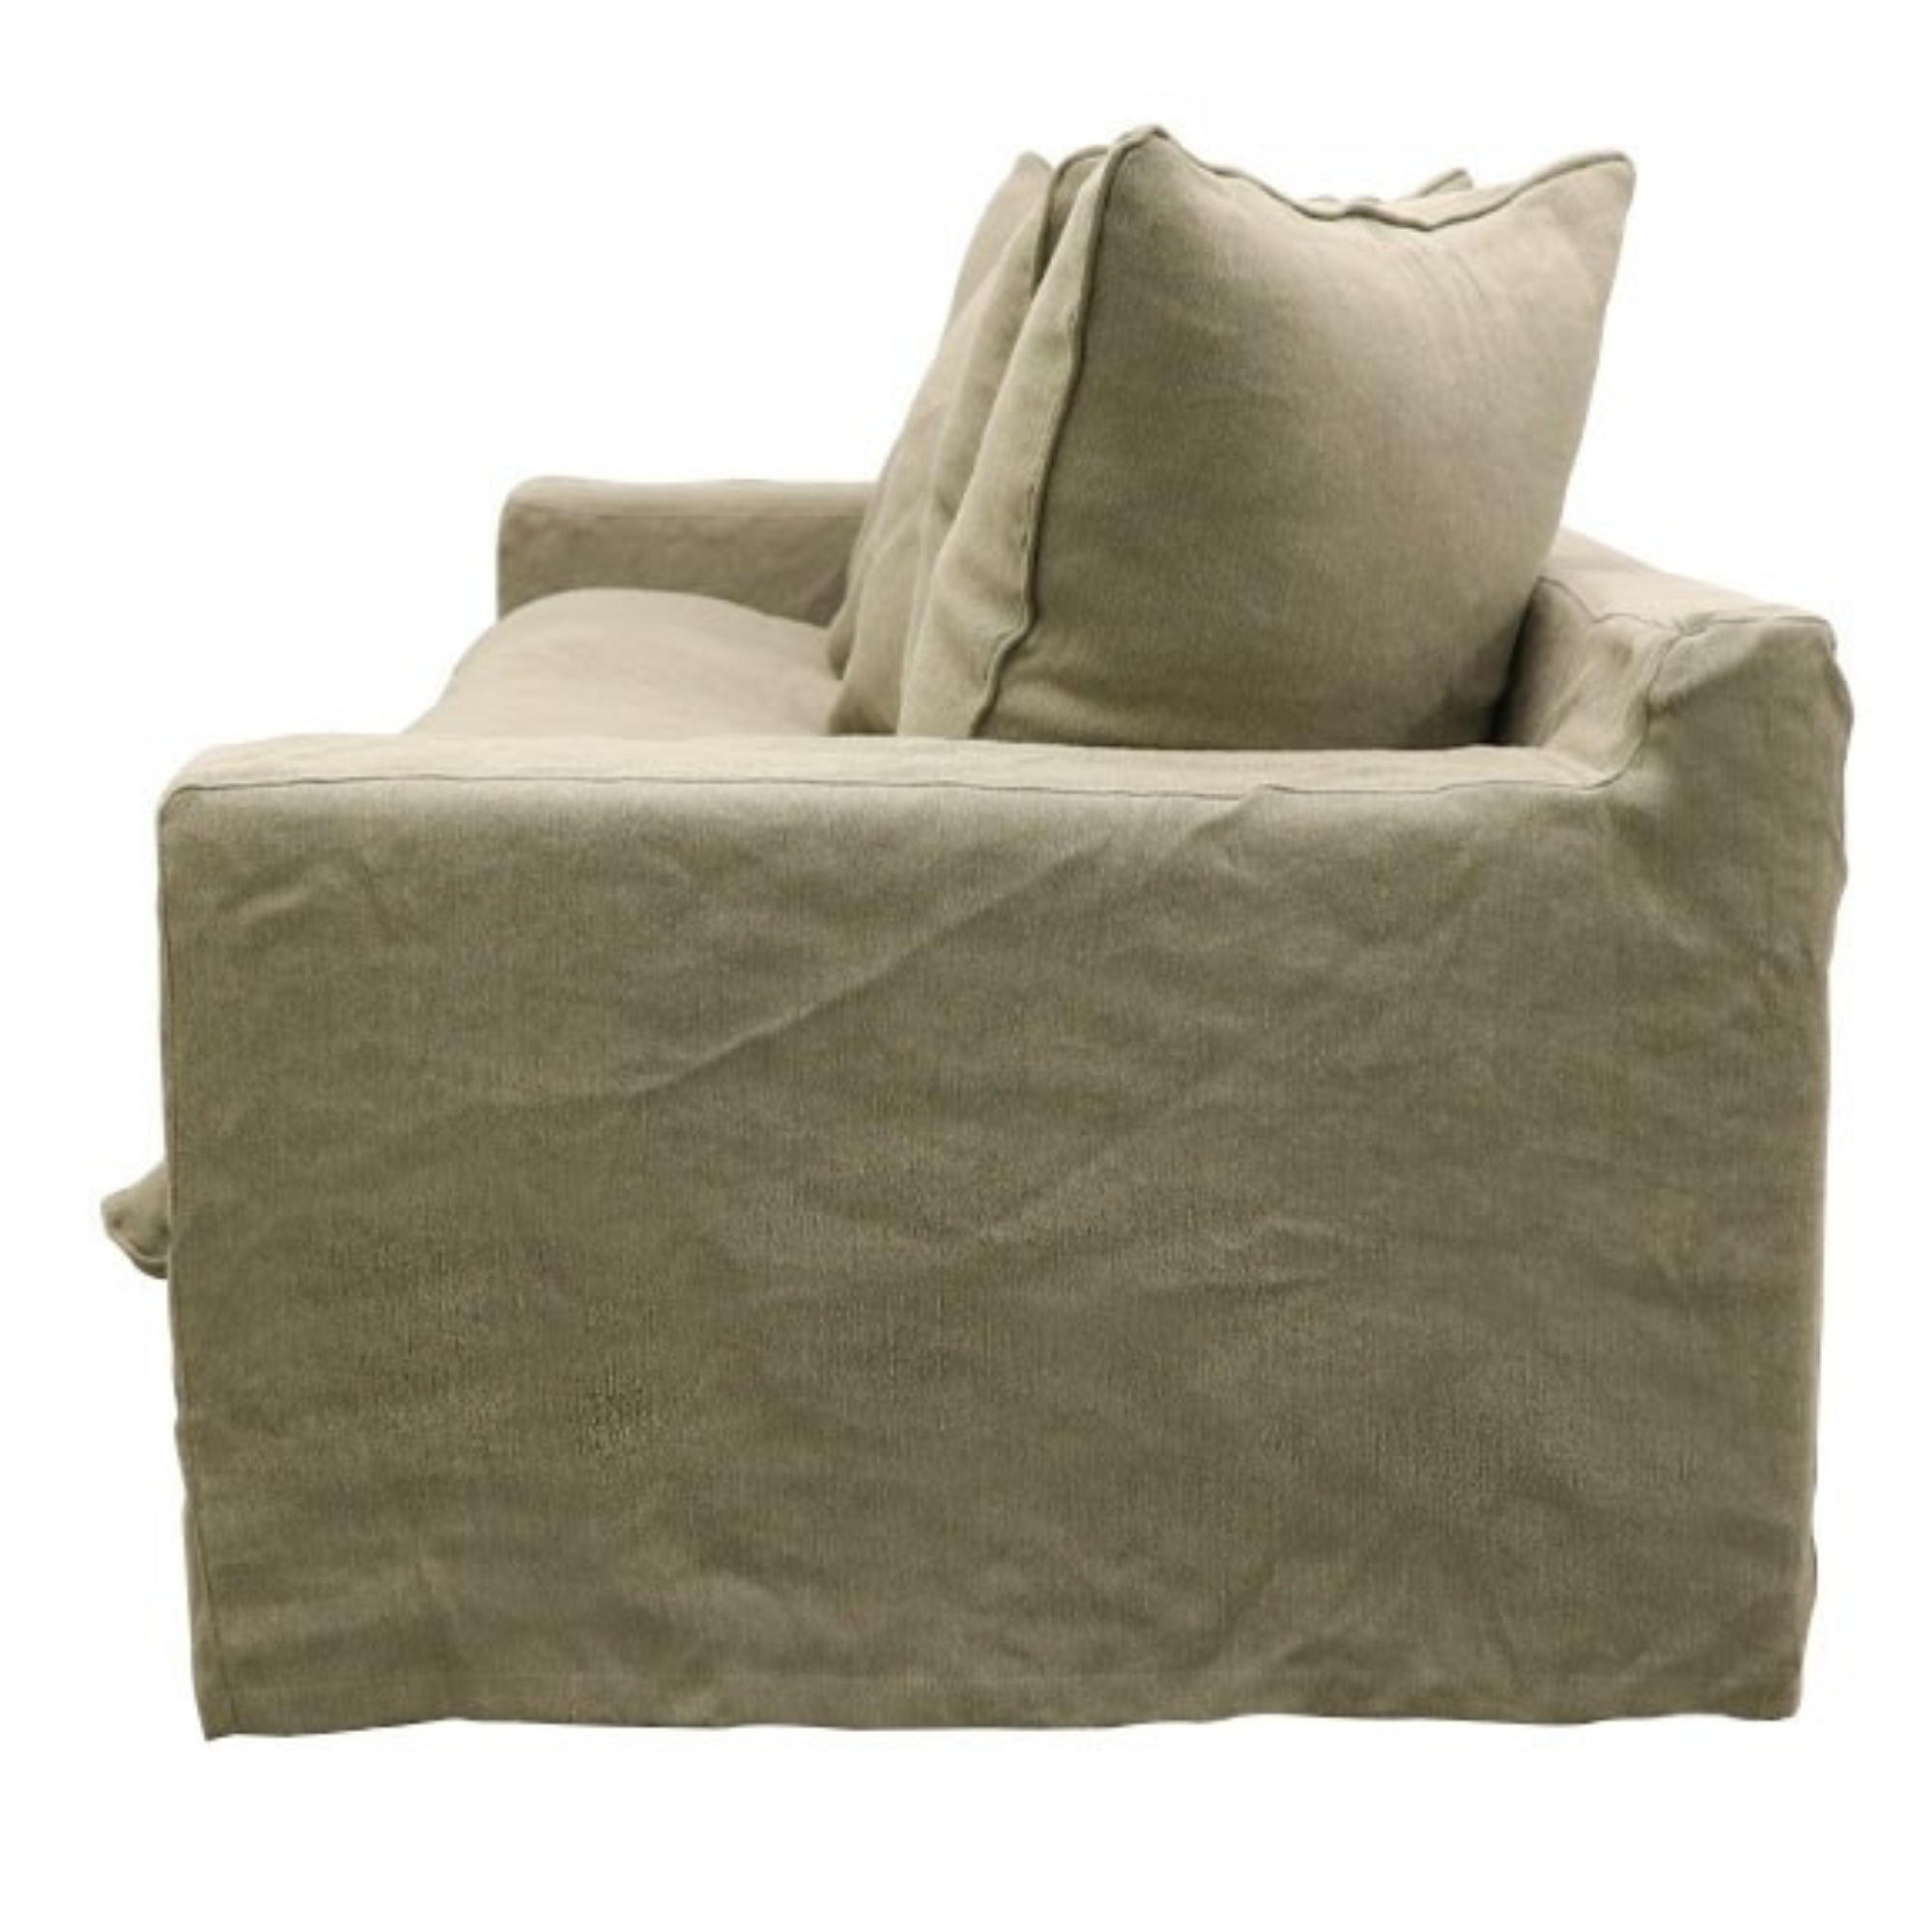 KEELY SLIPCOVER 2 SEATER SOFA | 5 COLOURS